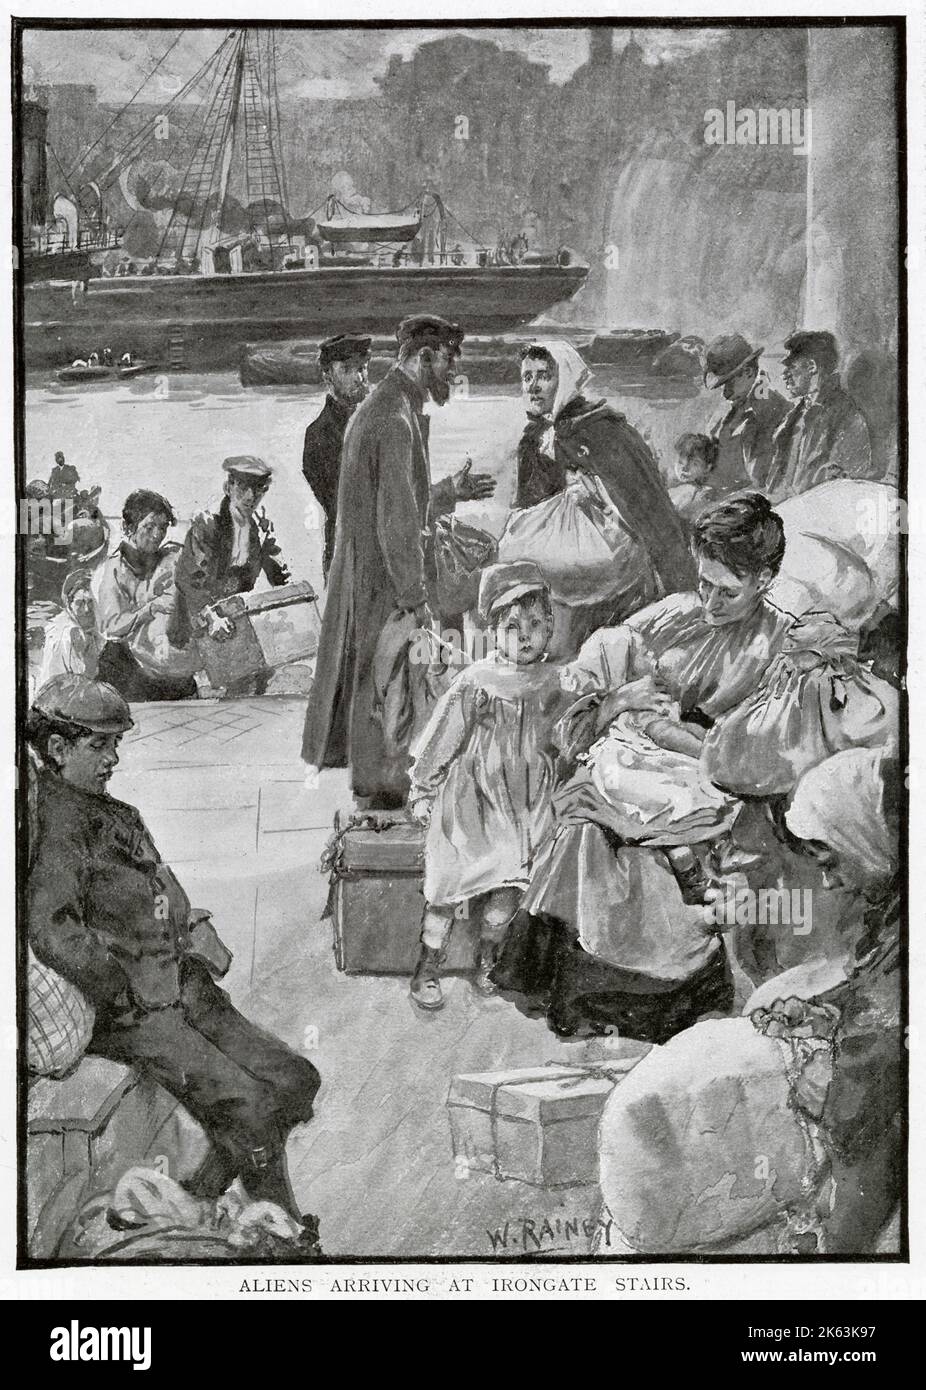 Emigrants just arrived off a steamer at the steps of Irongate, St. Katharine's Docks, in the City of London, where they are met by a man who speaks their language and who can show them where to get some lodgings to start their new lives.         Date: 1900 Stock Photo